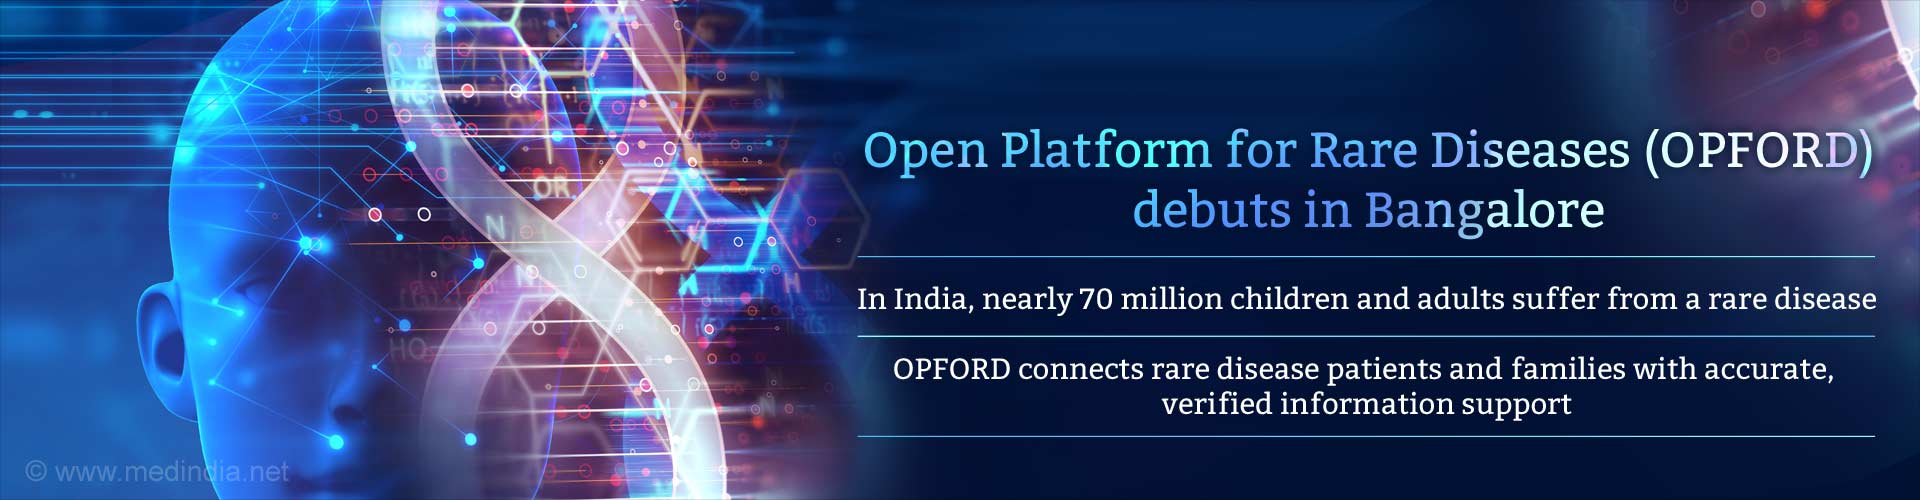 open platform for rare diseases (OPFORD) debuts in bangalore
- In India, nearly 70 million children and adults suffer from a rare disease
- OPFORD connects rare disease patients and families with accurate, verified information support
